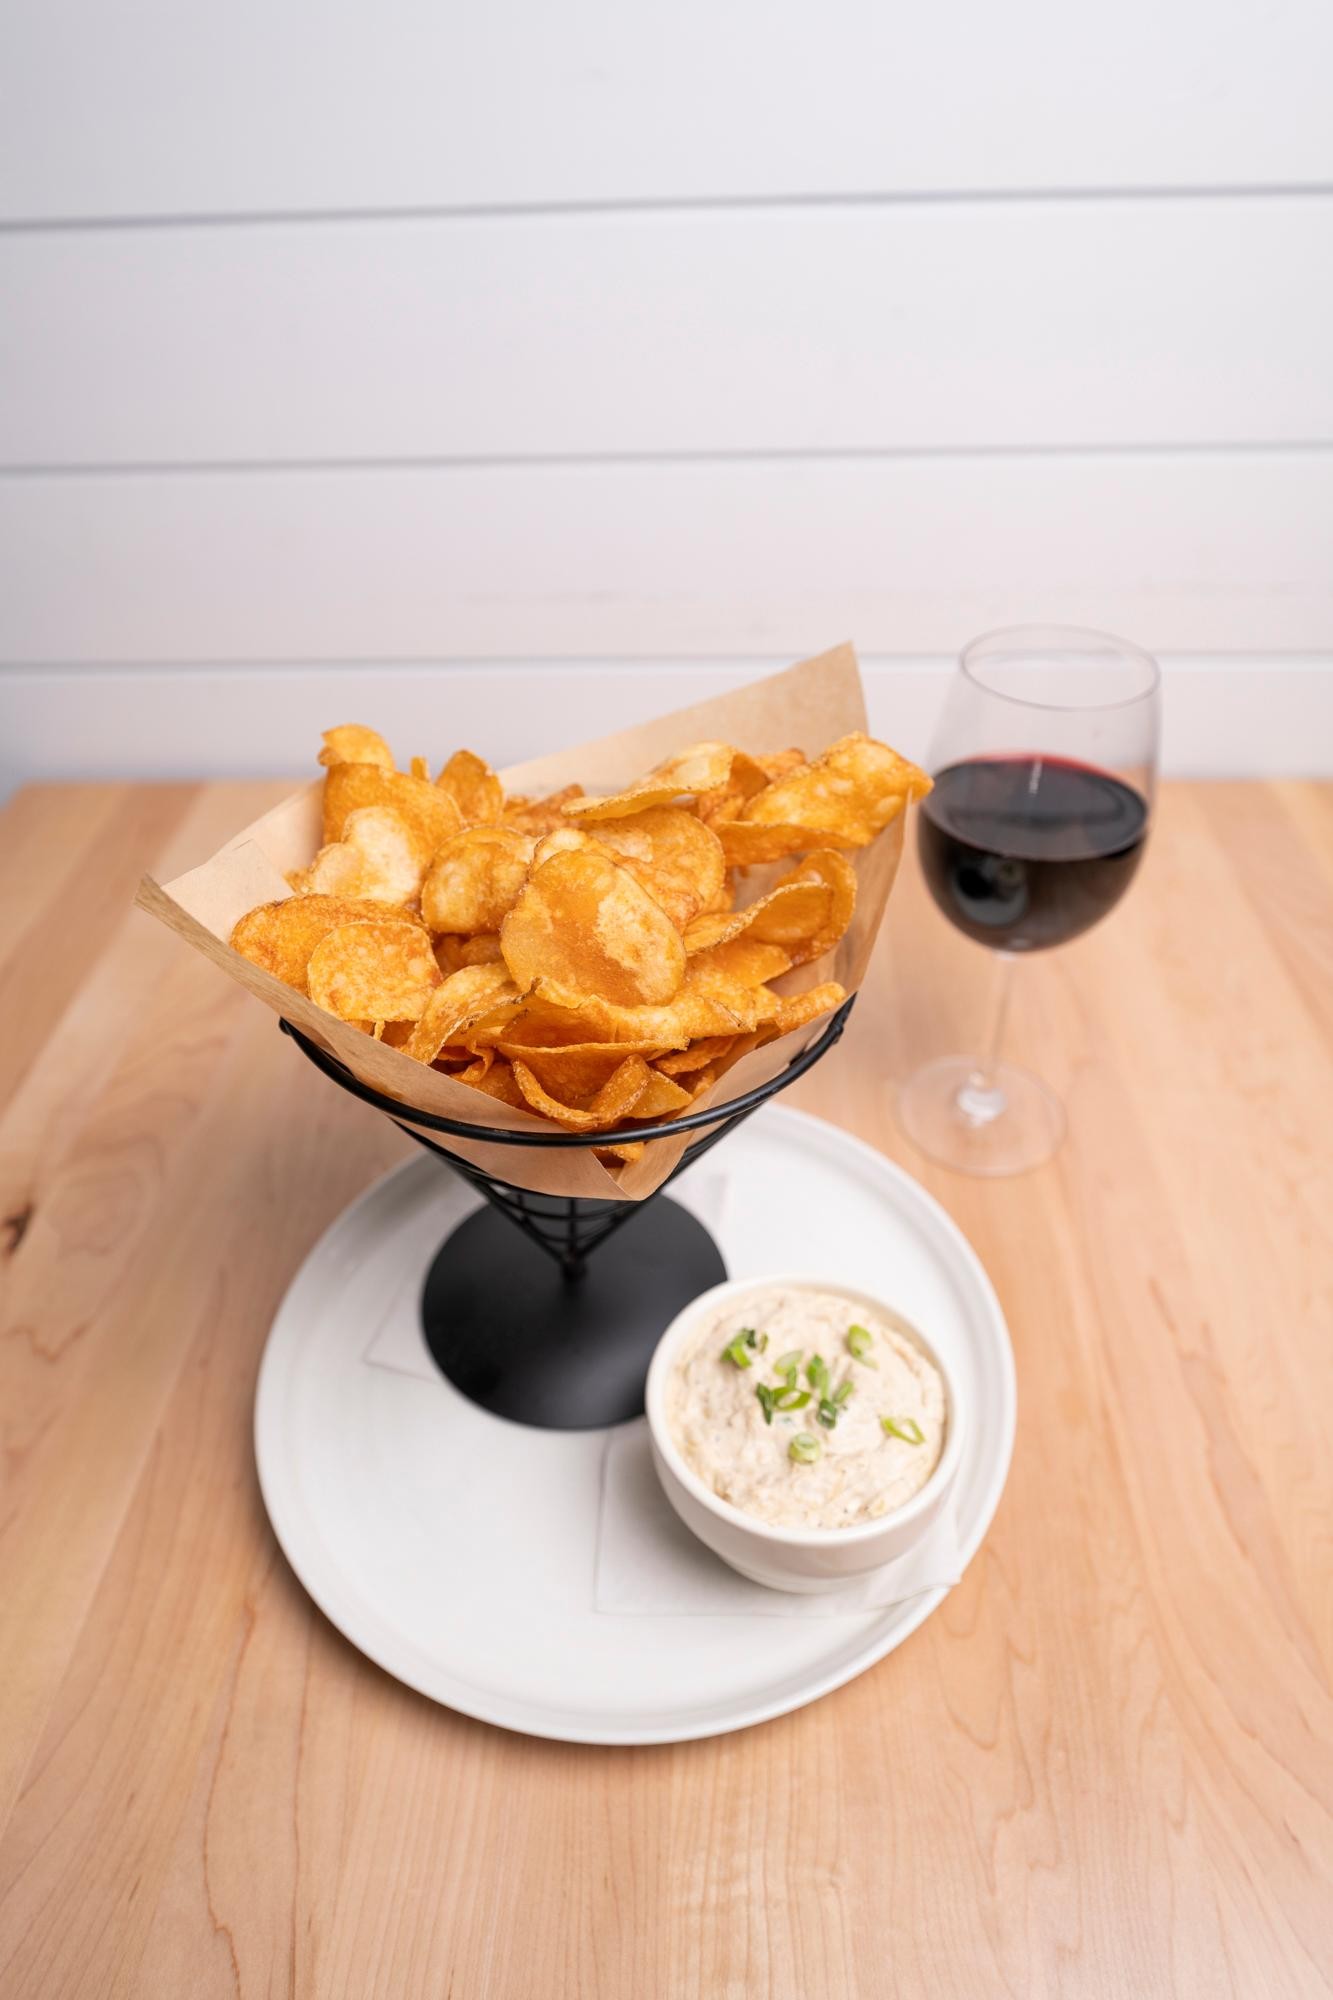 House Chips & French Onion Dip